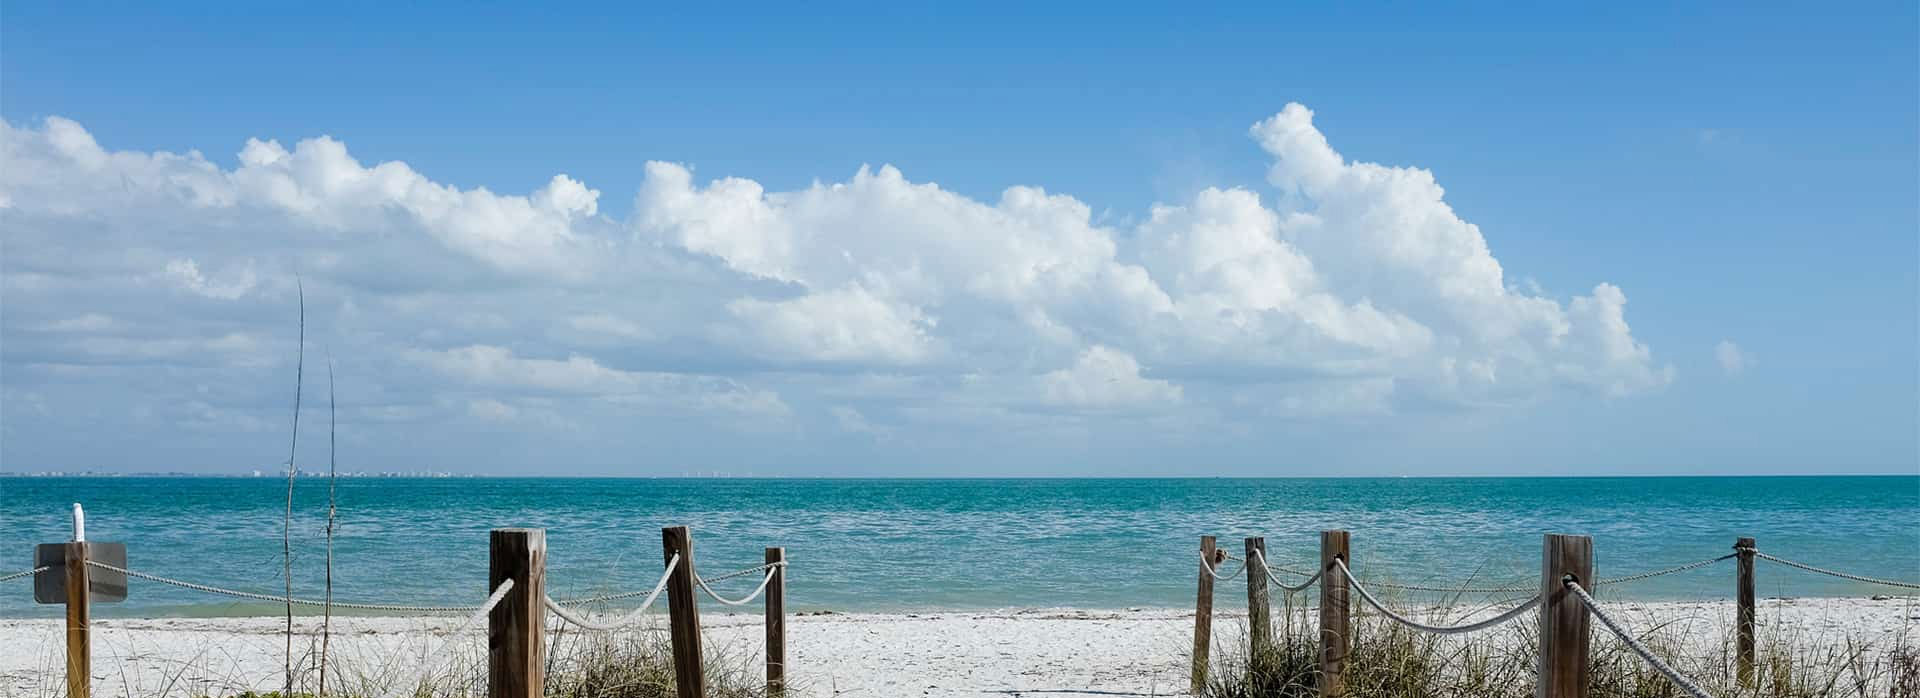 A Pet Friendly Guide to Sanibel Island